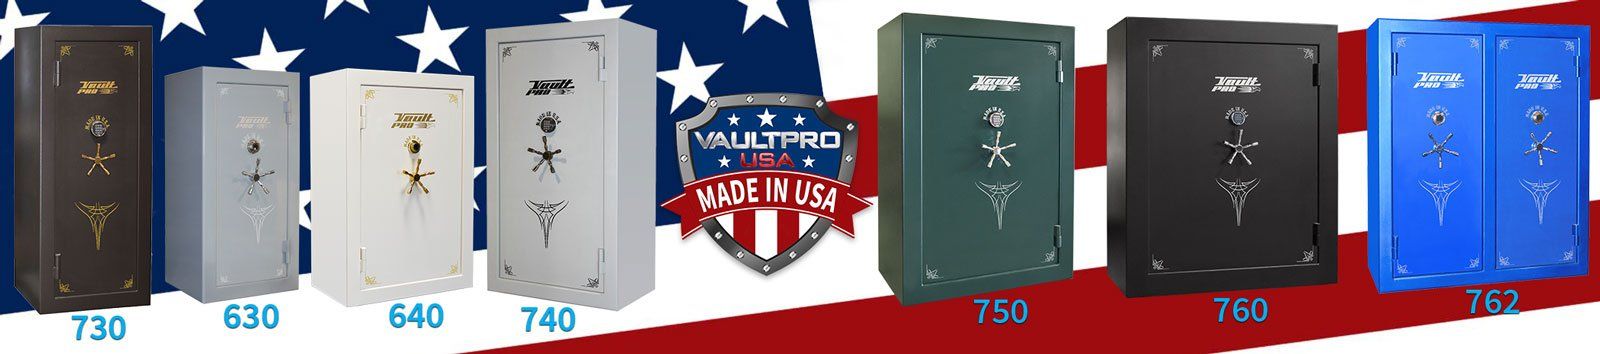 Best safes in USA factory direct from the manufacturer made in America